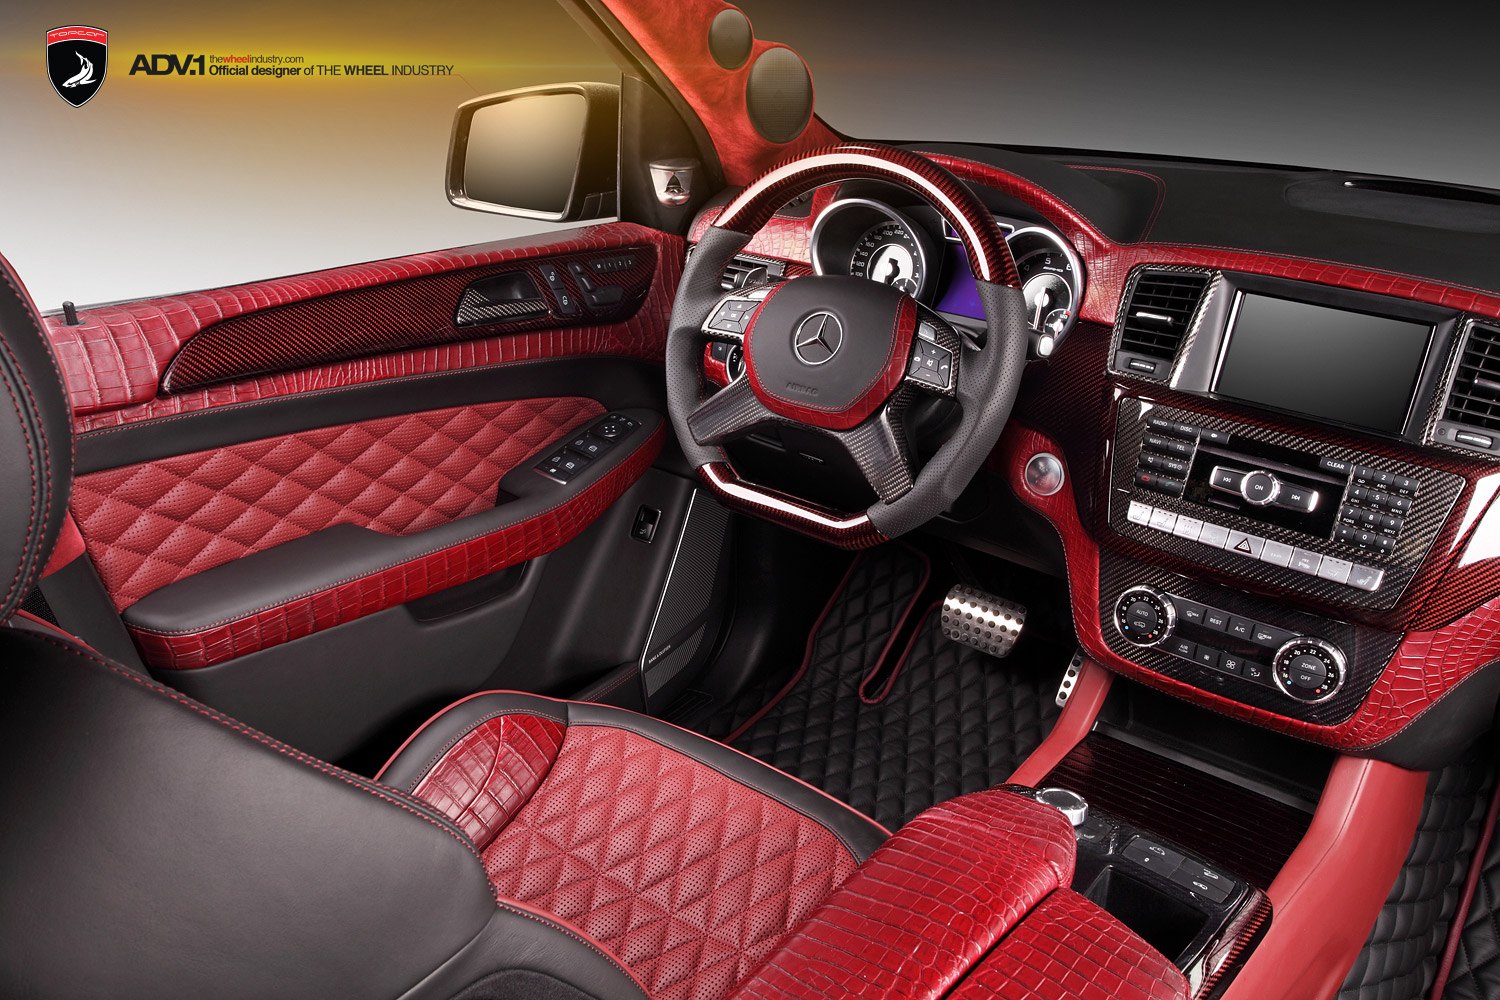 Rich Red Interior With Crocodile Leather in Mercedes M-Class - Photo by ADV.1